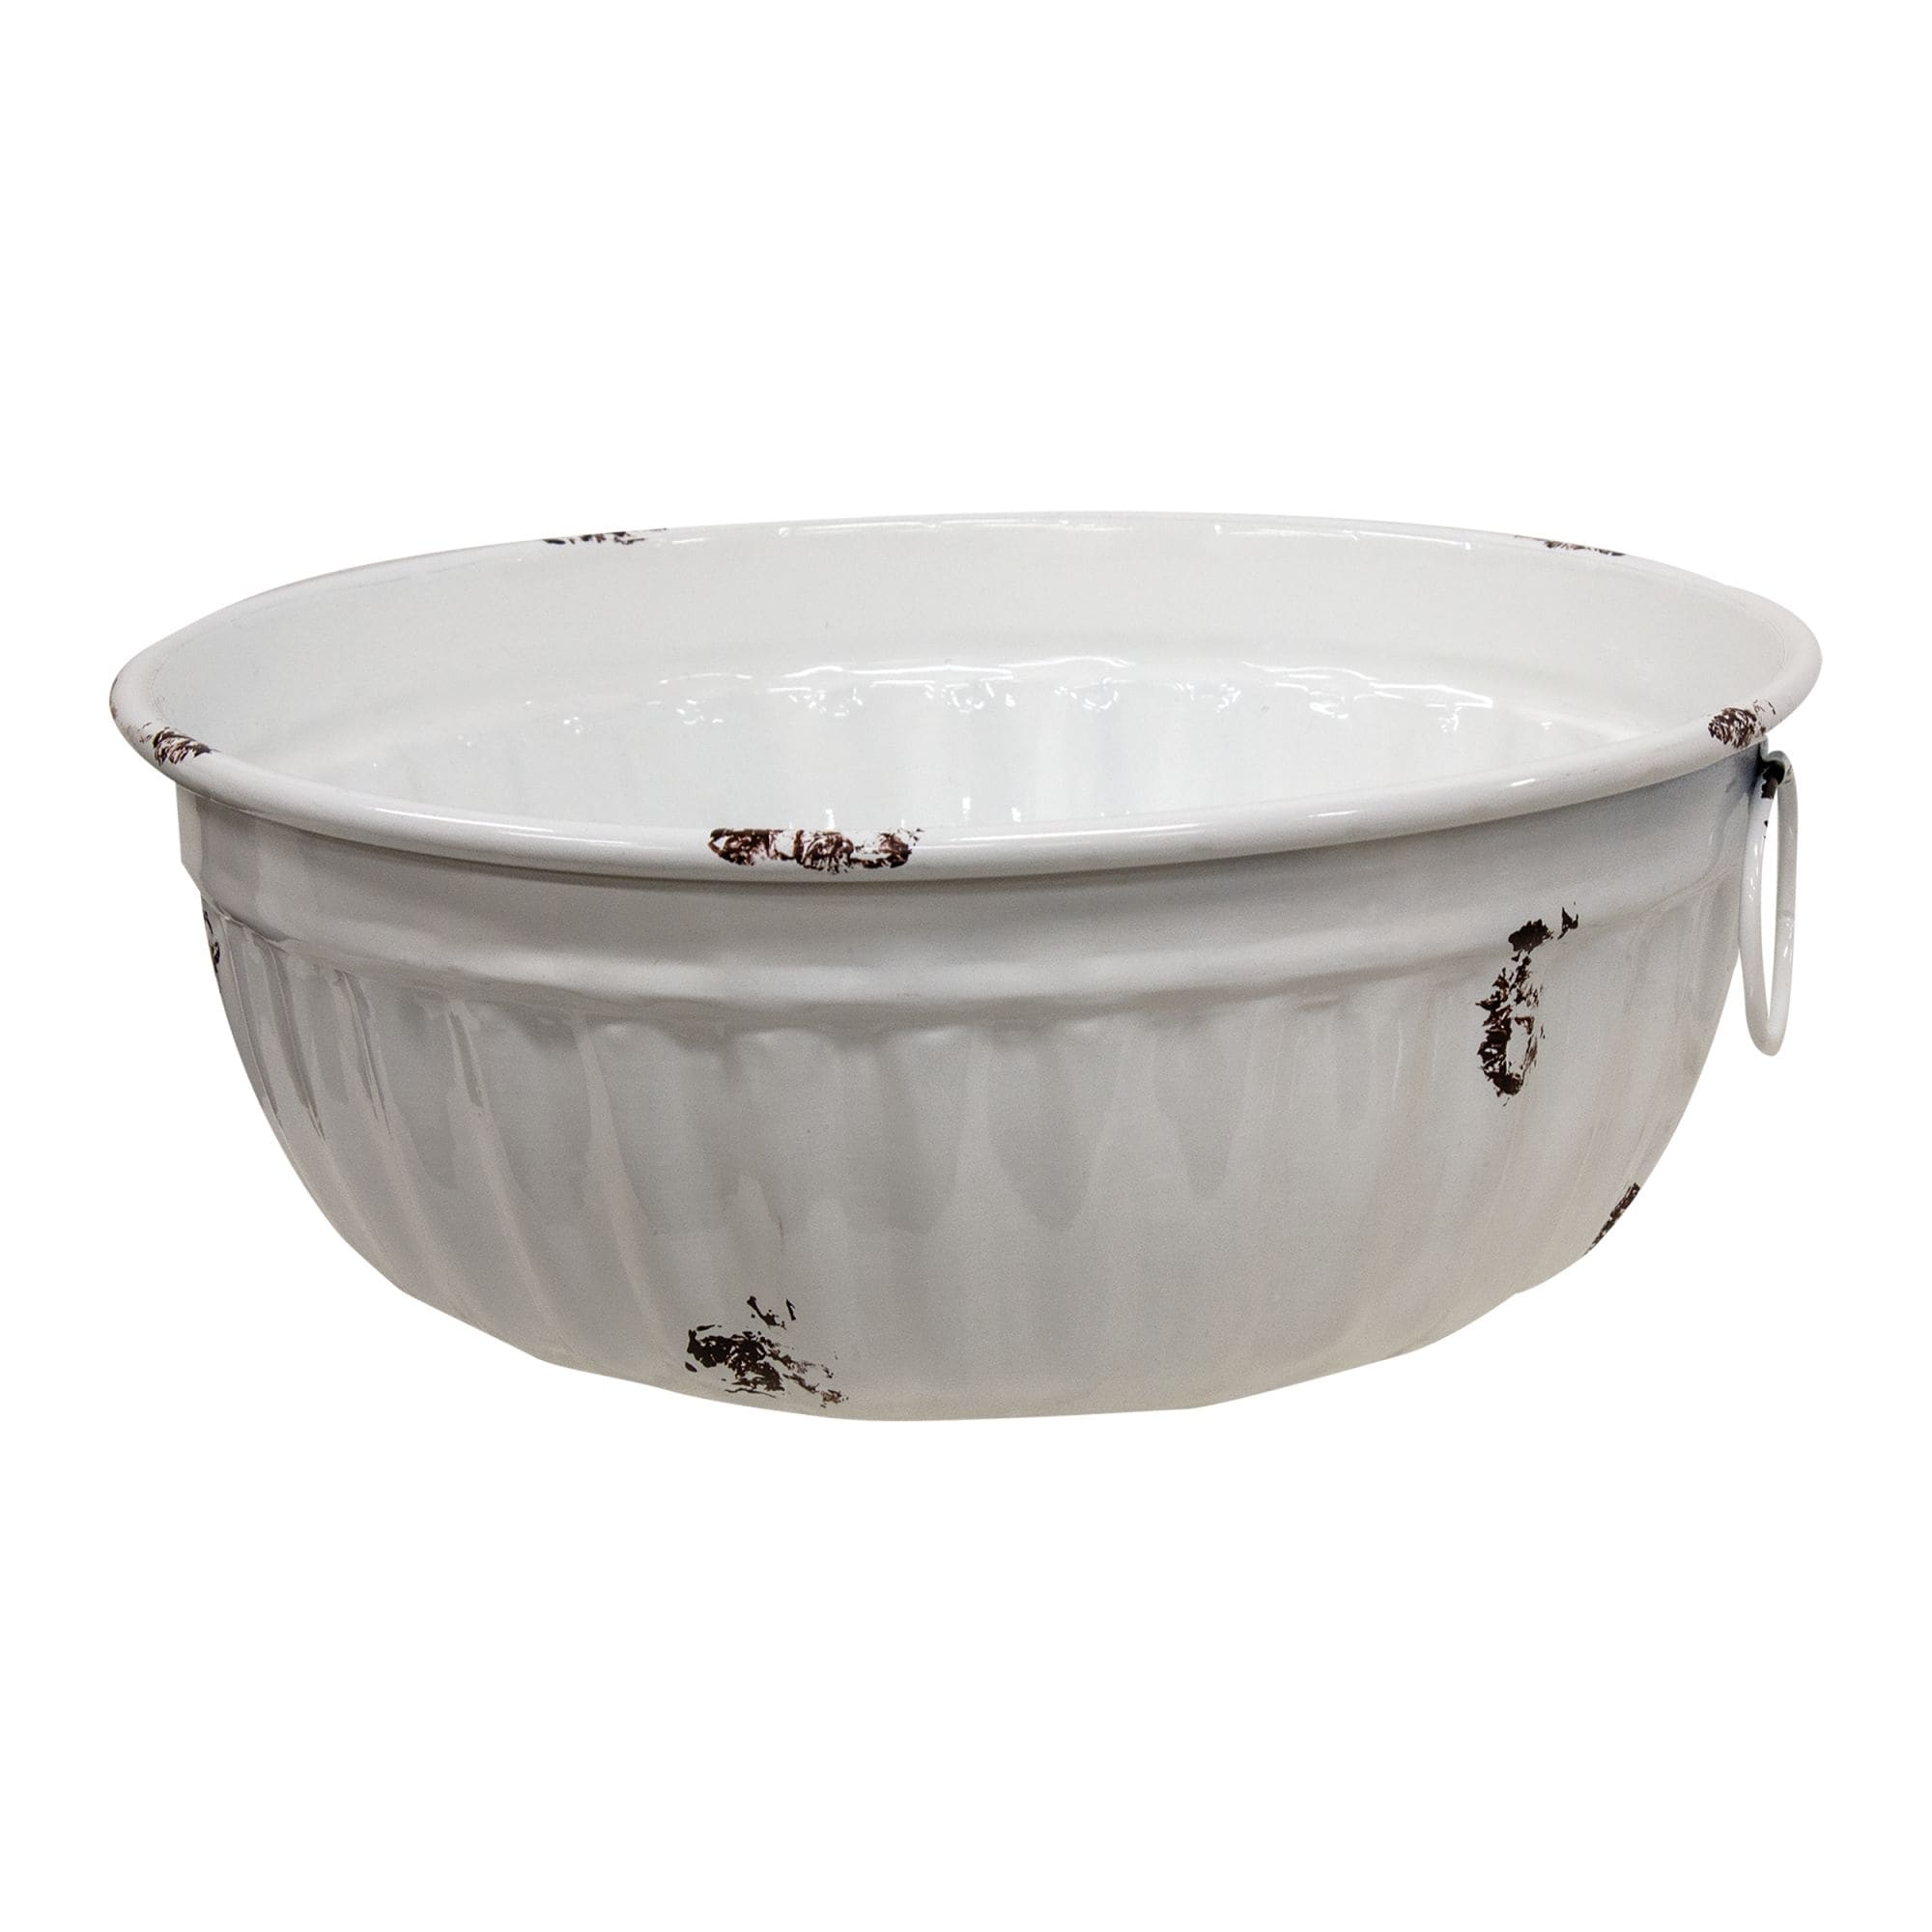 https://ak1.ostkcdn.com/images/products/is/images/direct/c4af755f915b90f201491d5a6a0c6b0ac36ec85a/3-Set-Distressed-White-Metal-Bowls-w-Handles.jpg